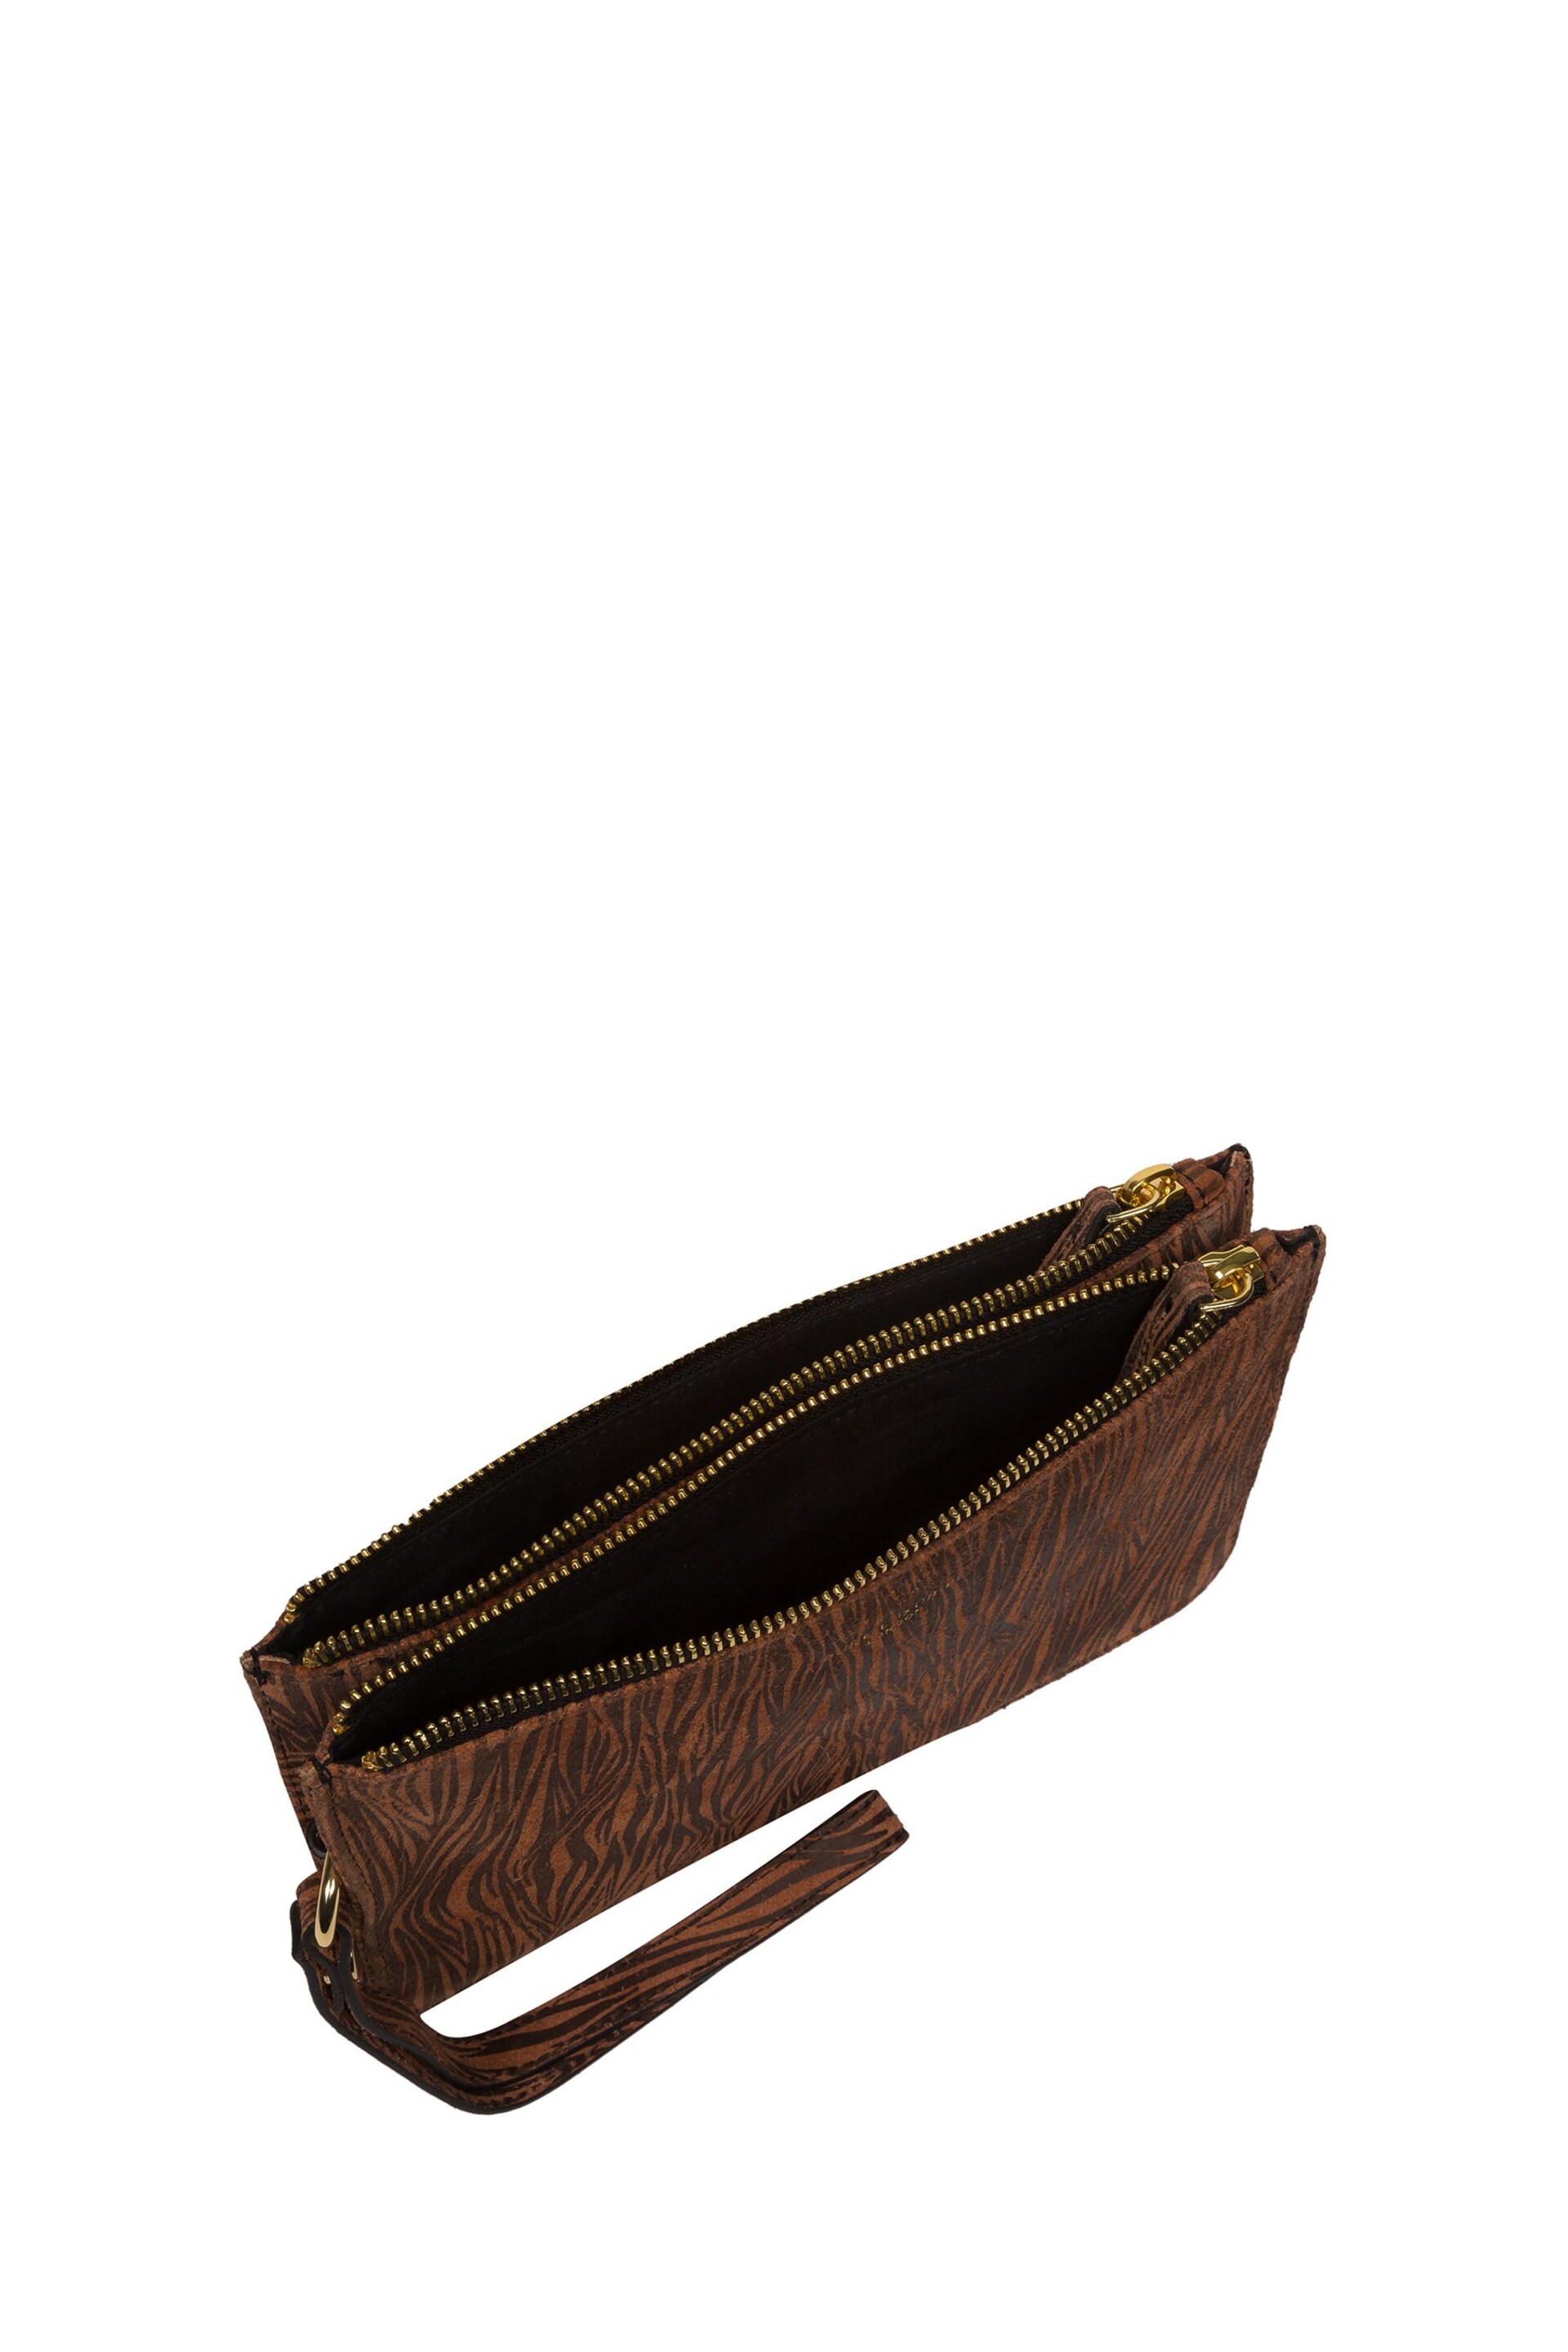 Pure Luxuries London Addison Nappa Leather Clutch Bag - Image 5 of 6